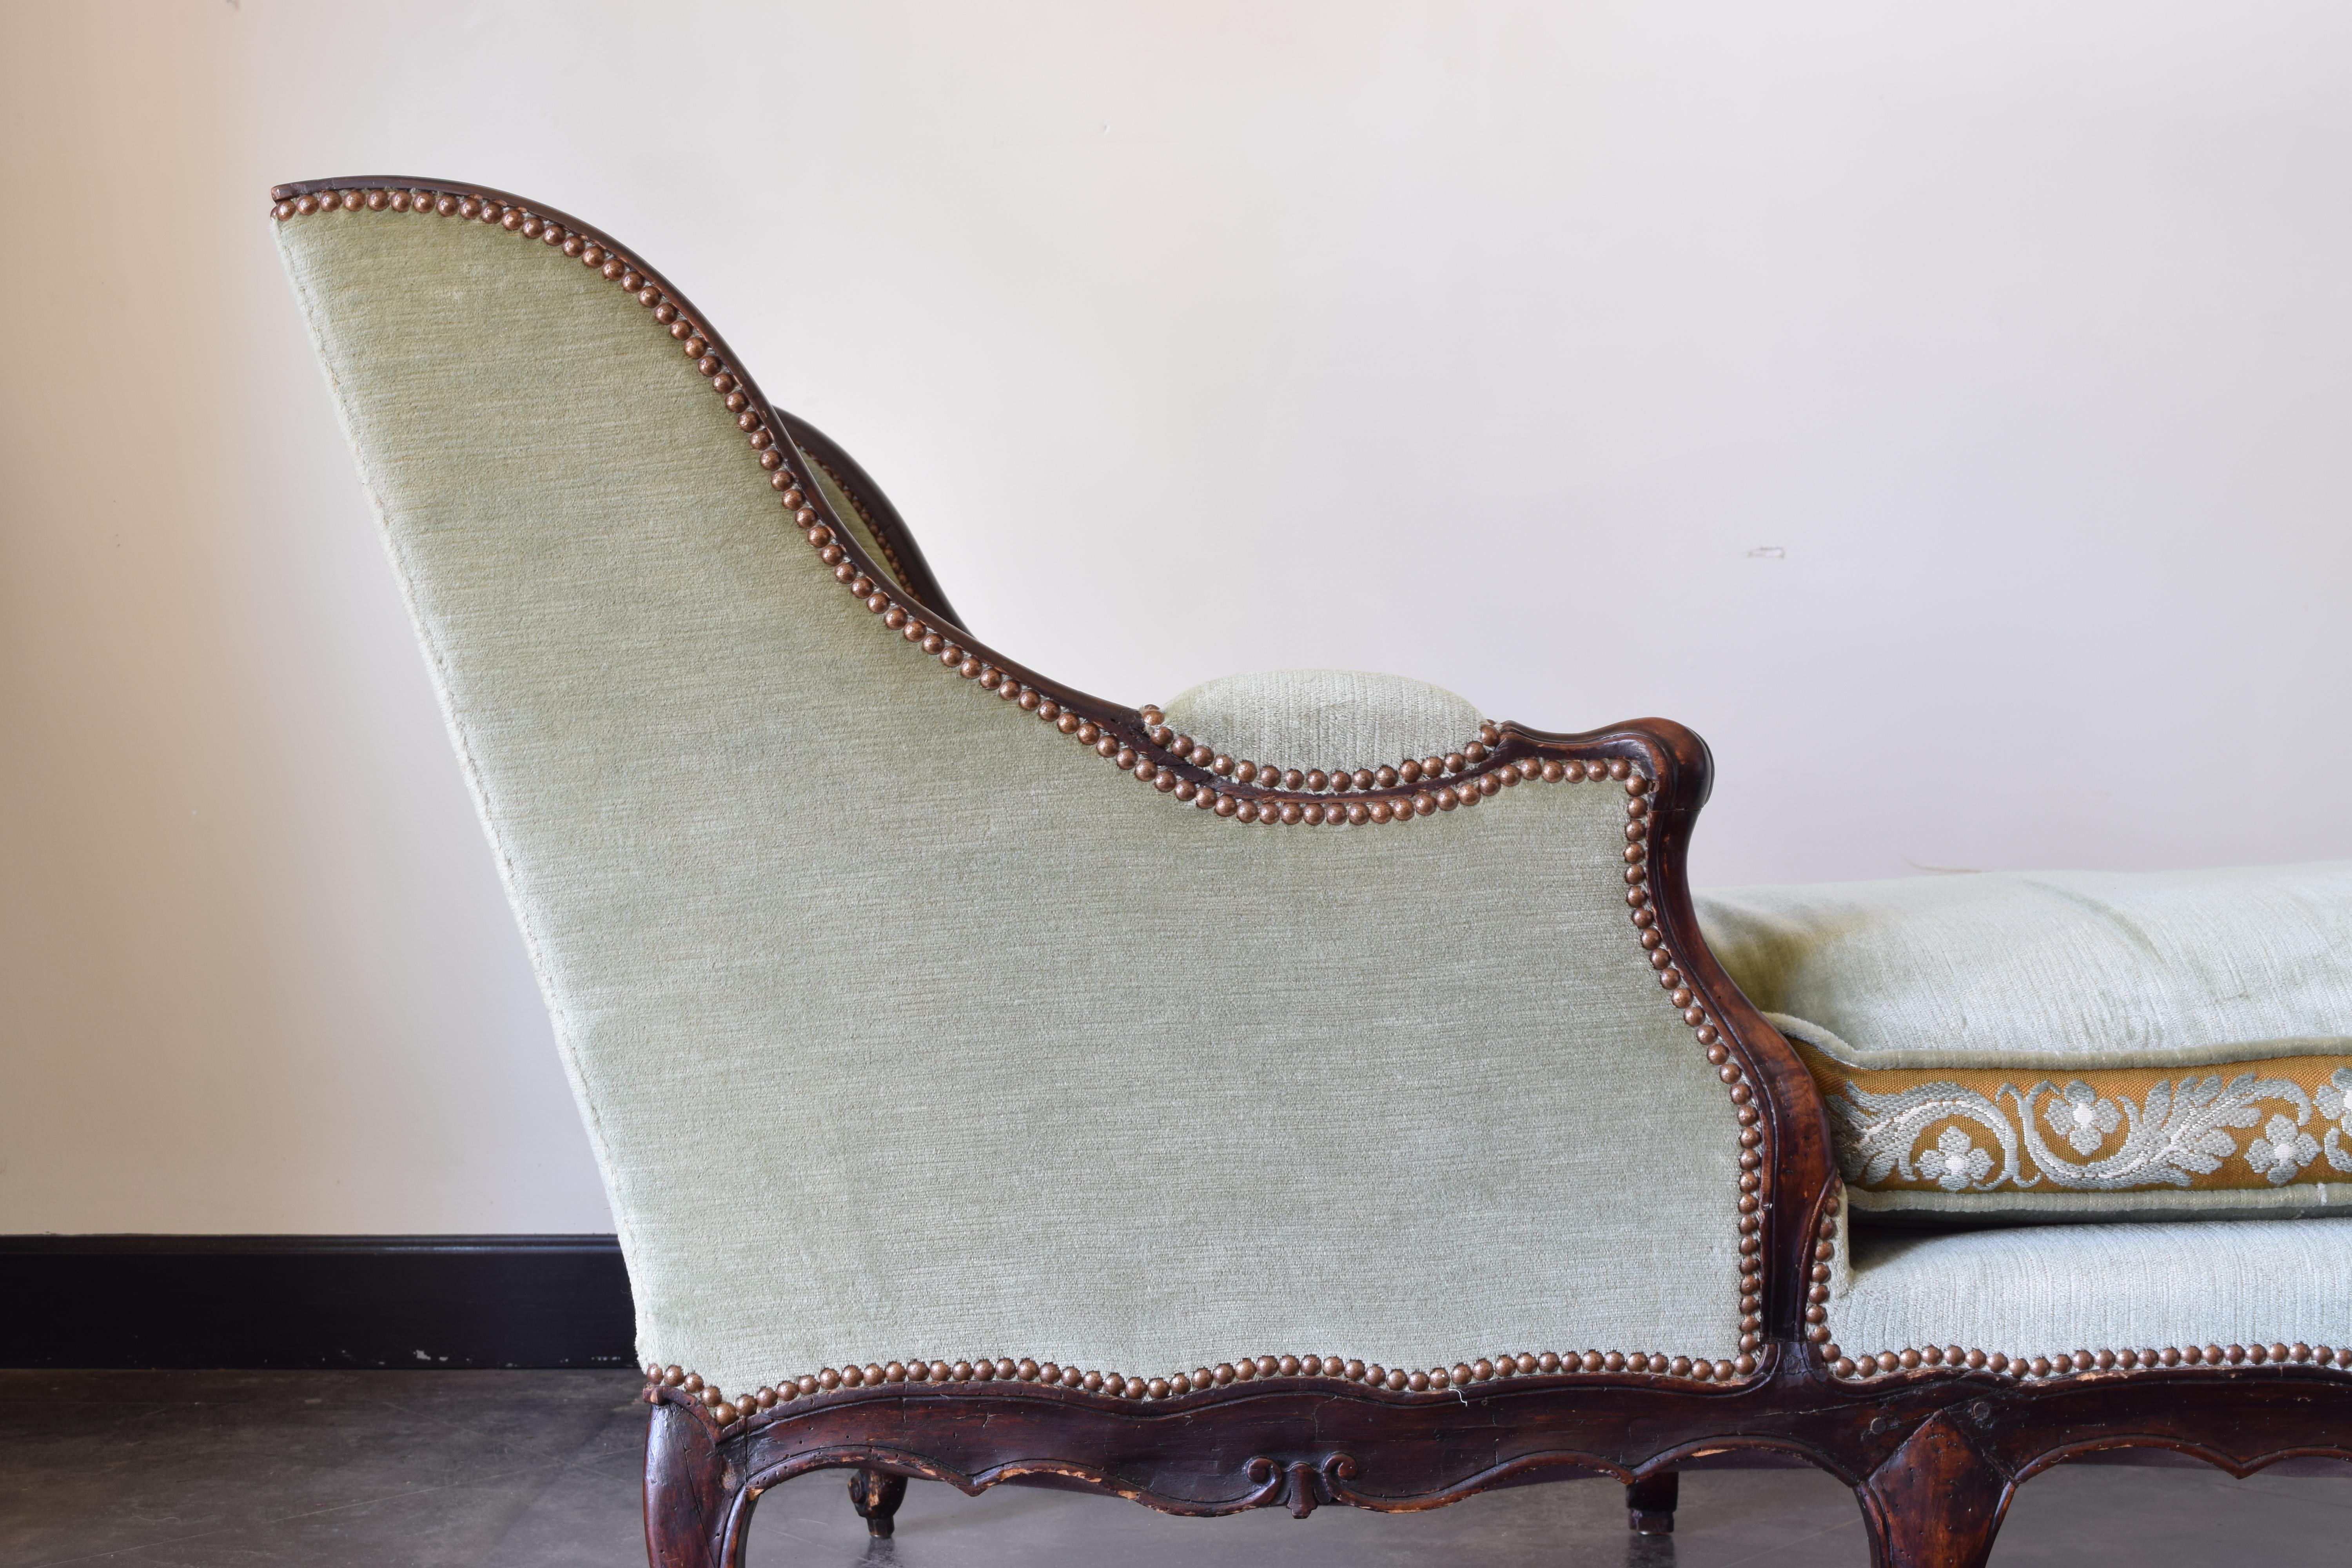 French Louis XV Period Carved Walnut & Upholstered Chaise Lounge, mid 18th cen. For Sale 2